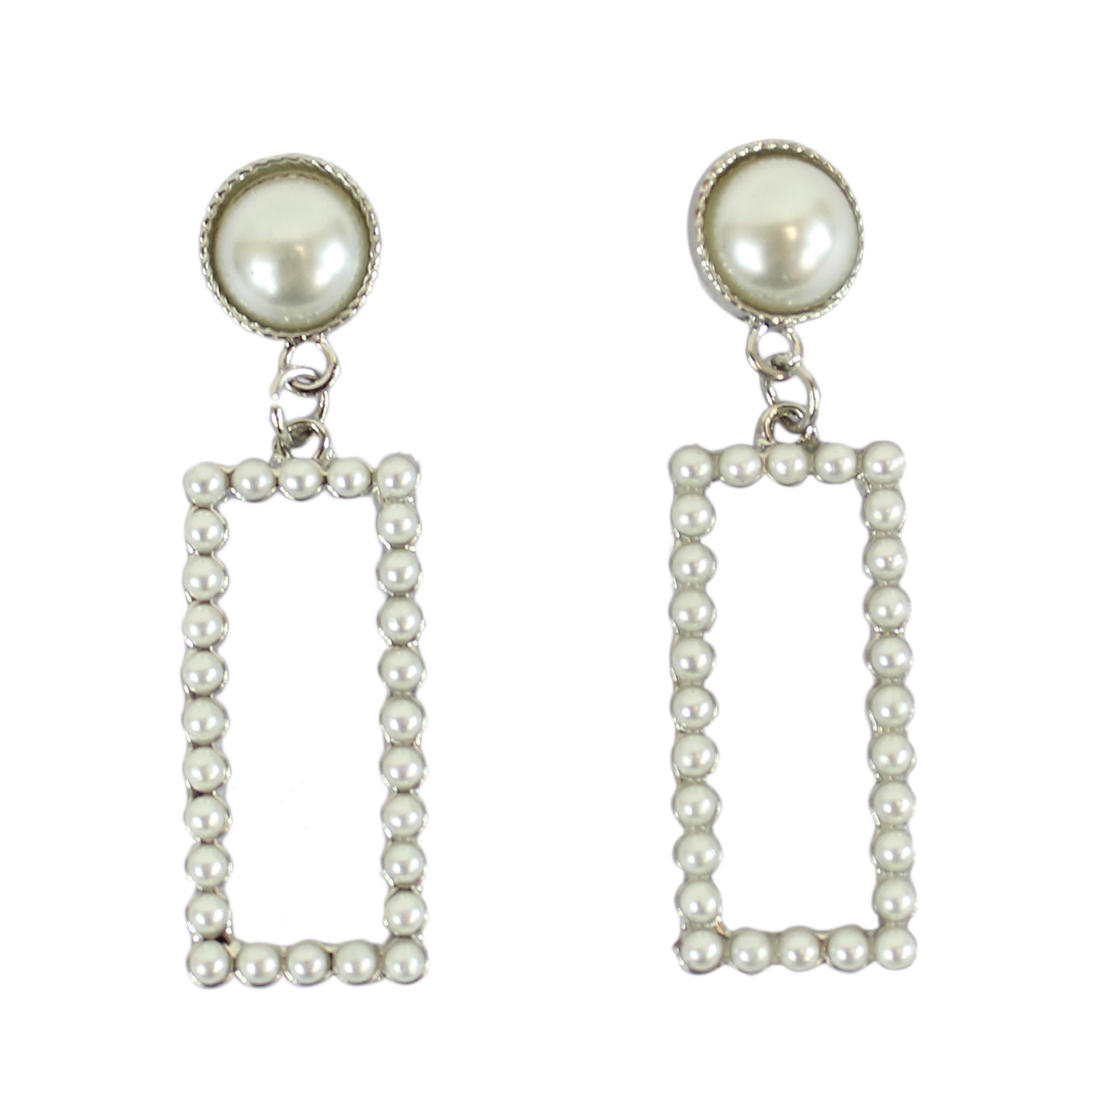 Dangle earrings with tiny pearls